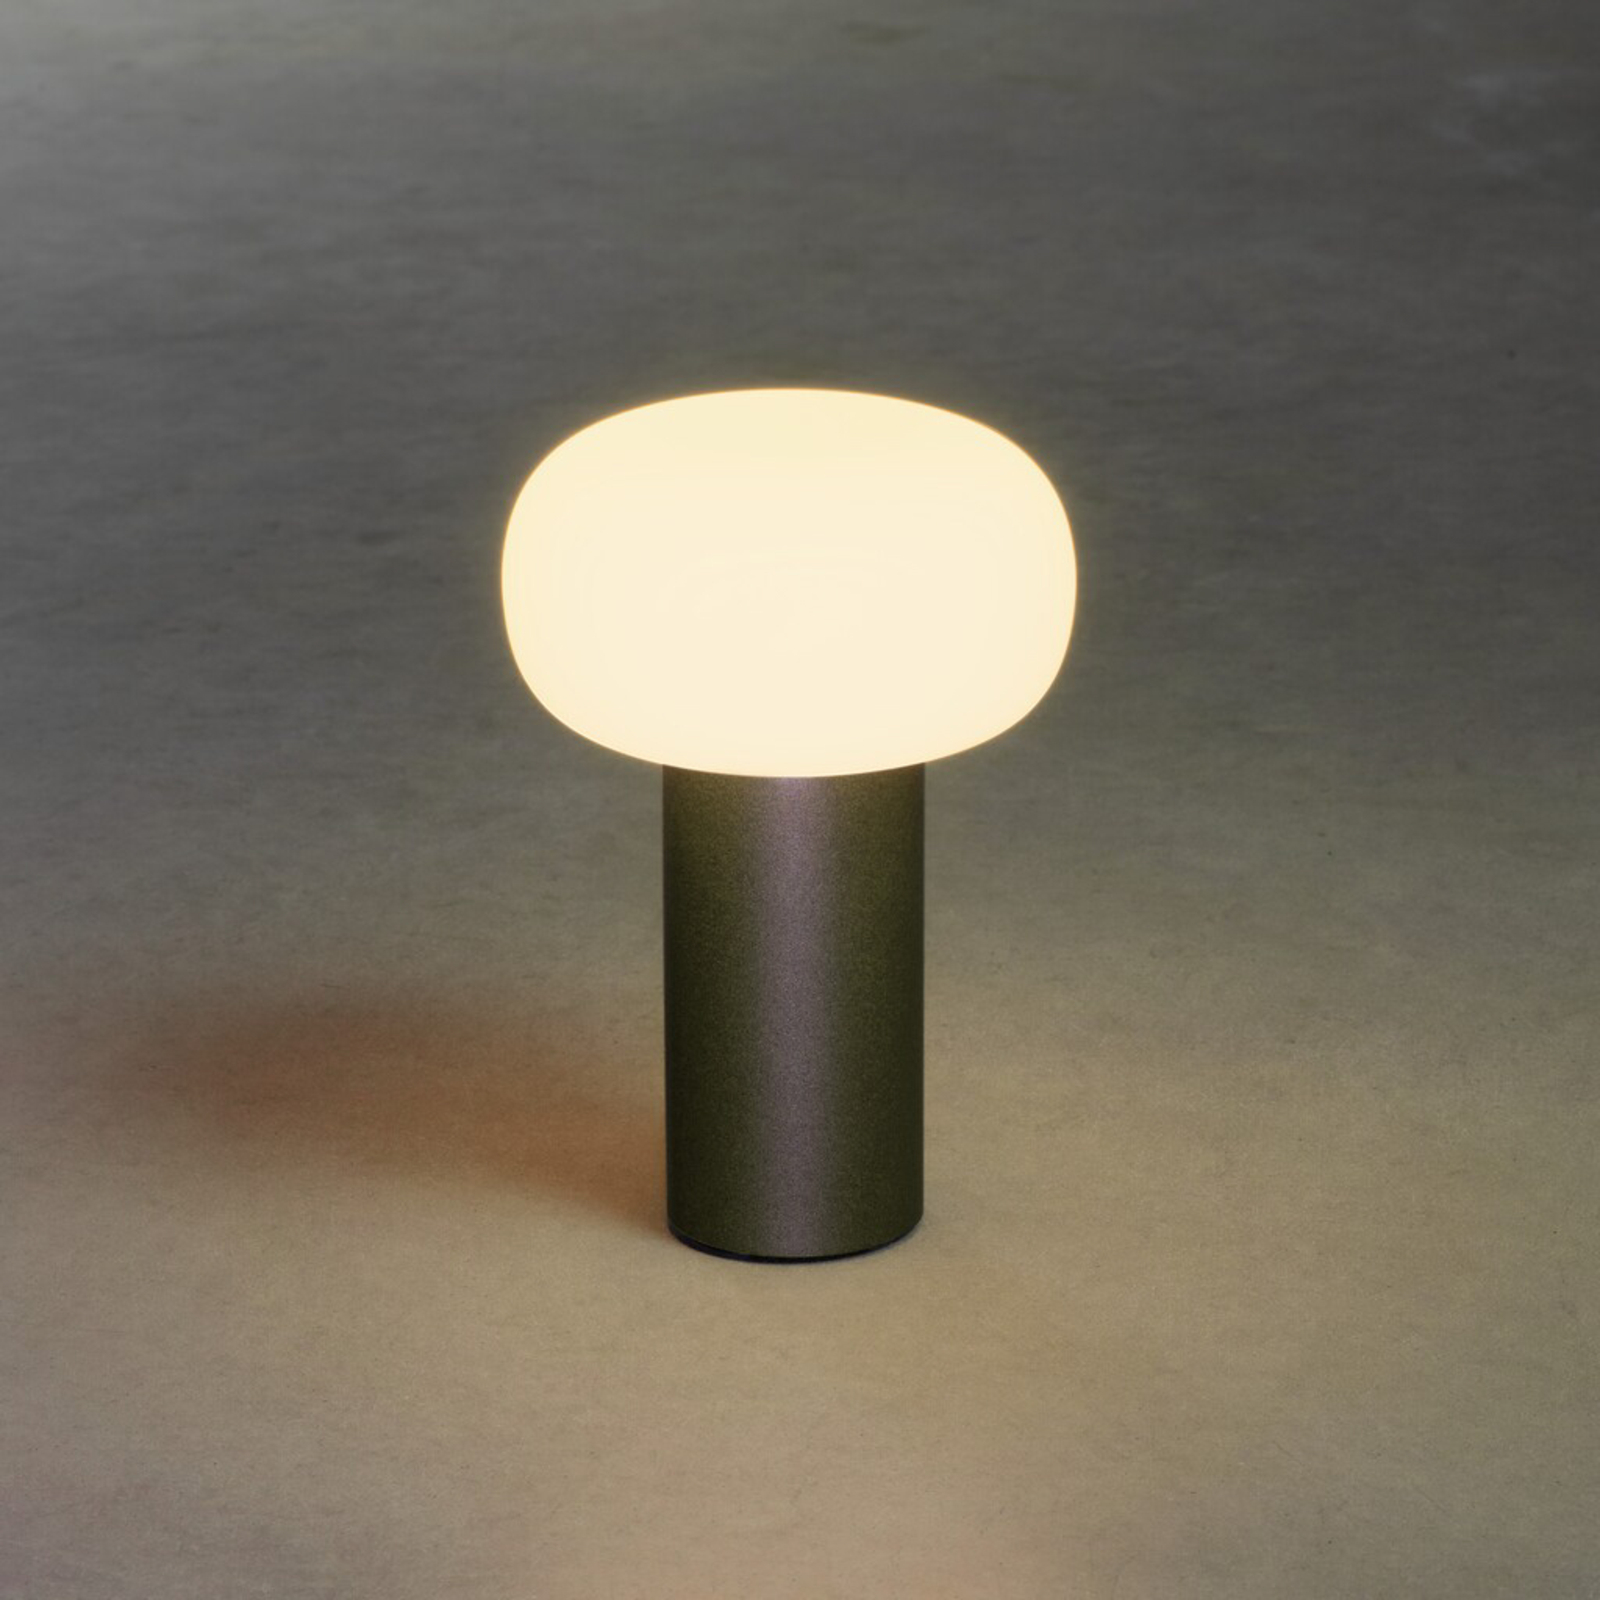 Lampe table LED Antibes IP54 batterie RGBW noire